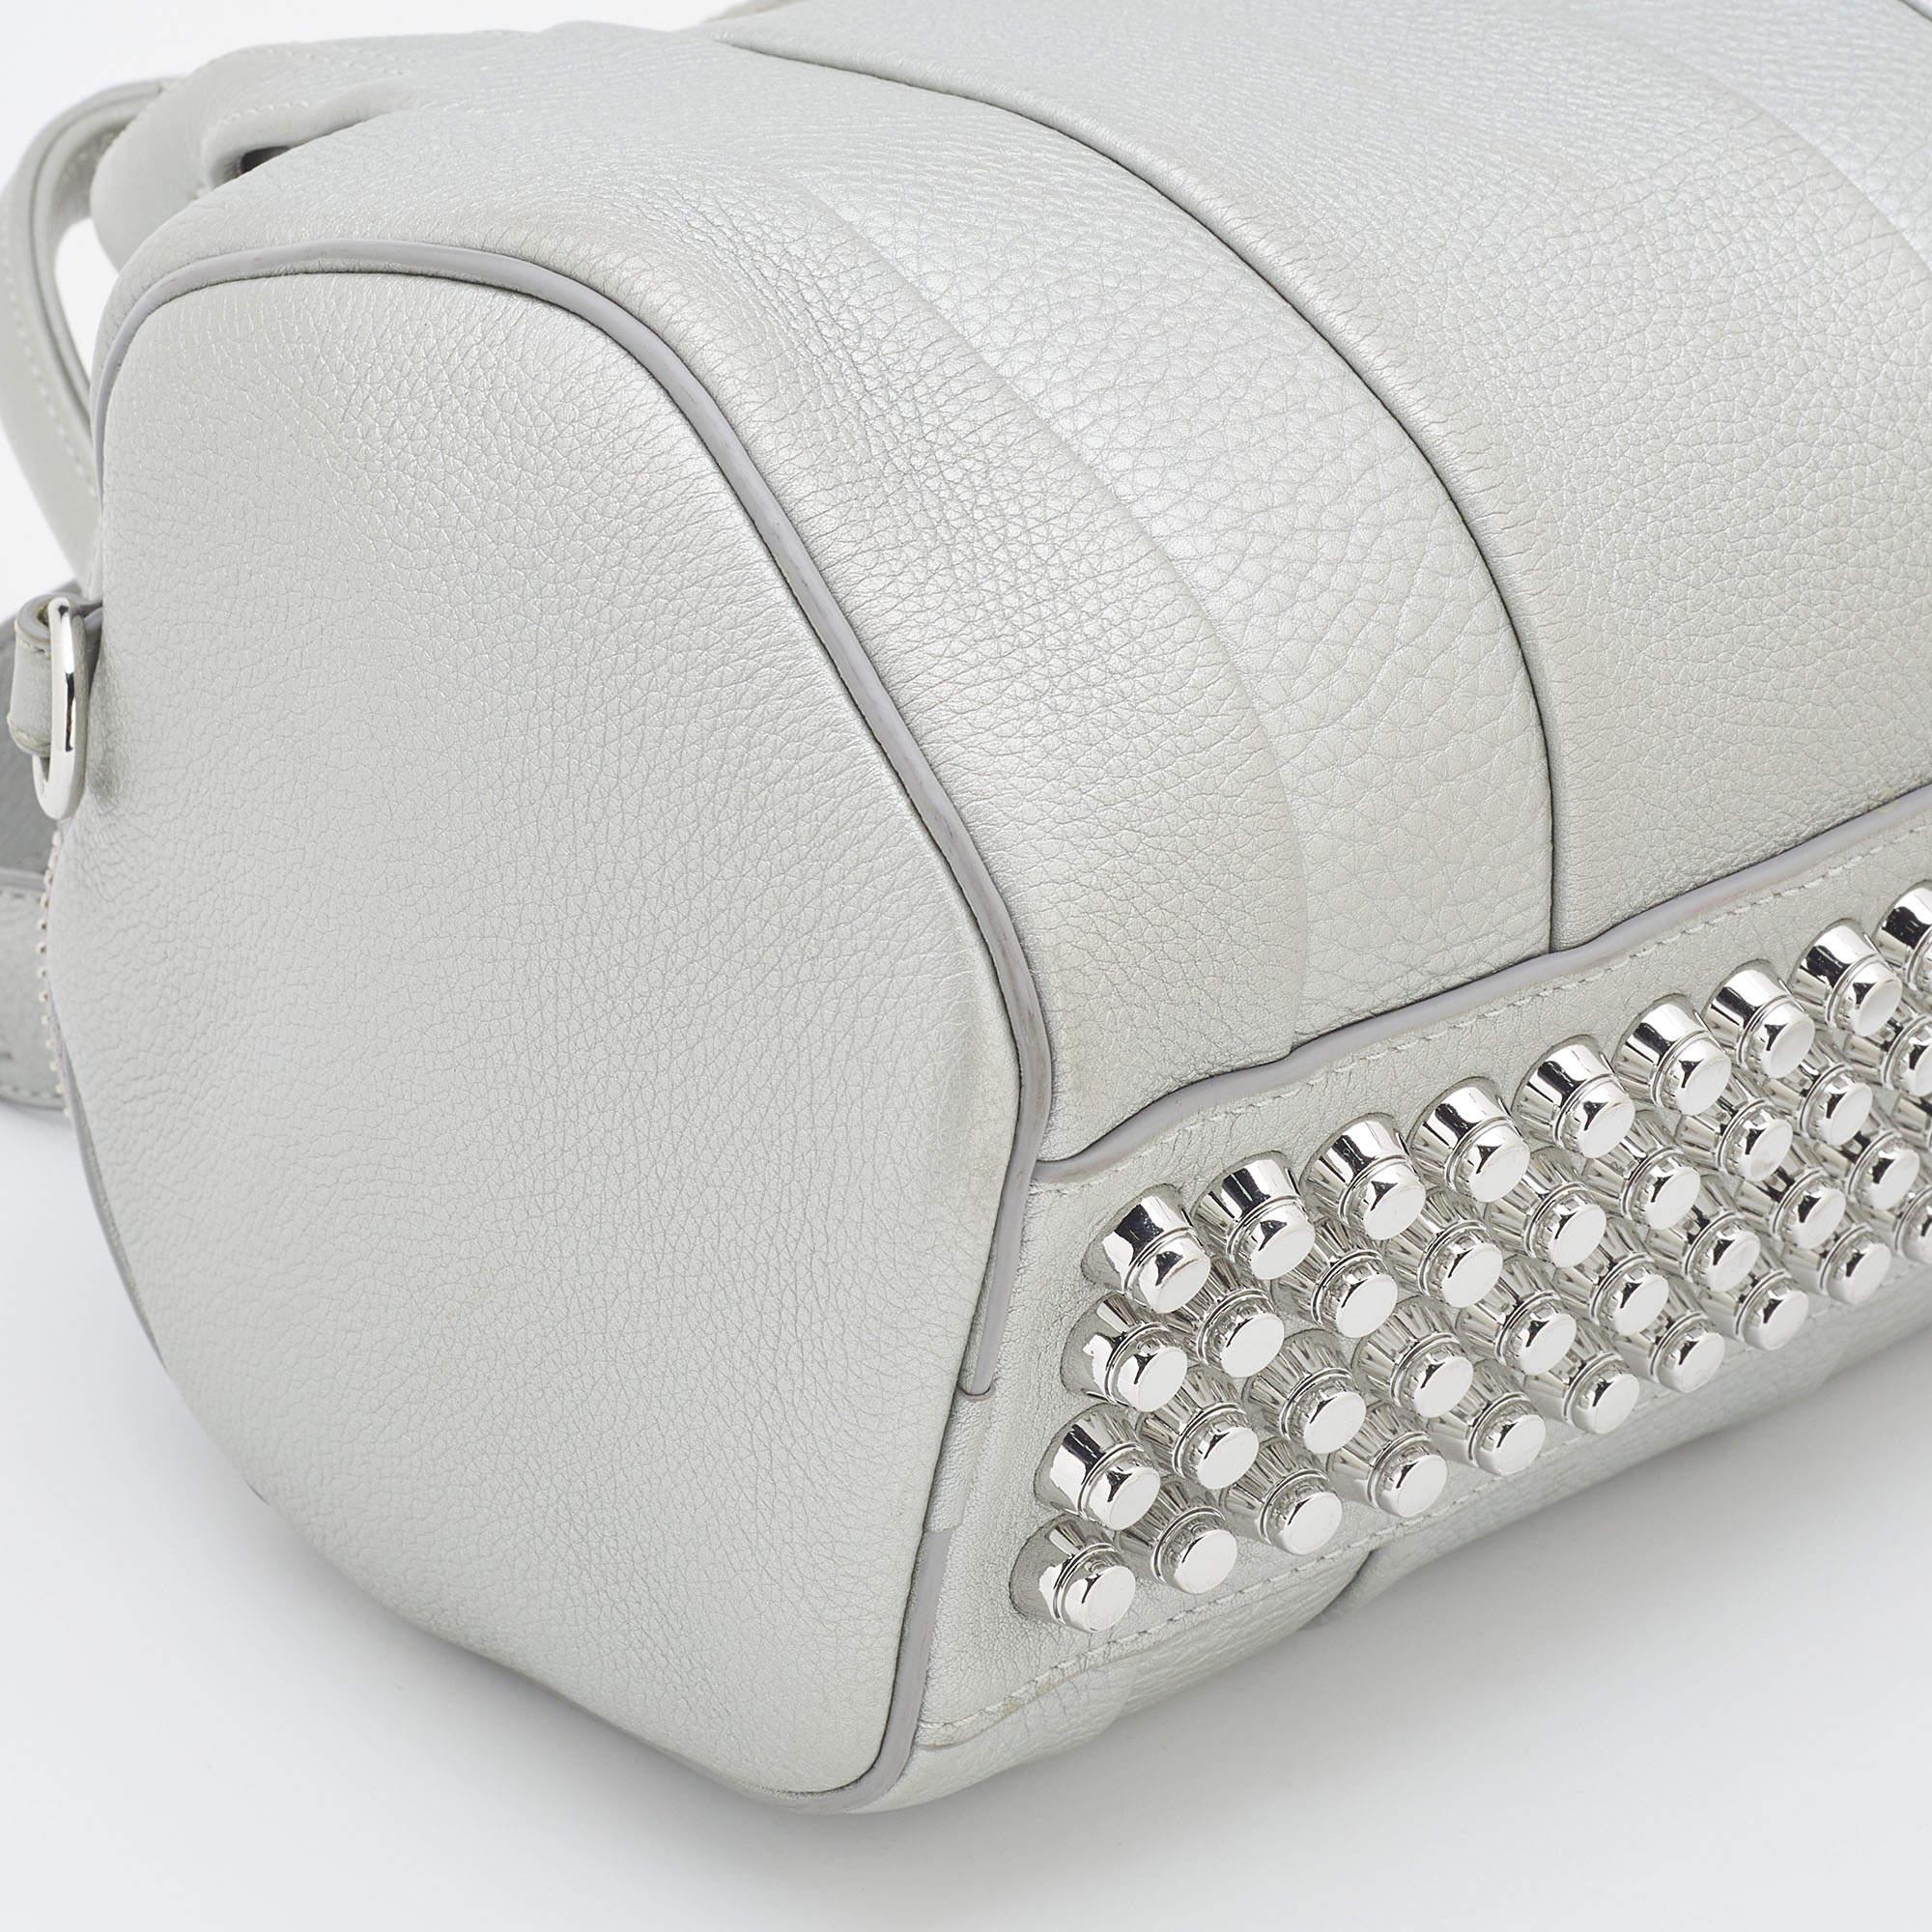 Alexander Wang Silver Textured Leather Rocco Bag 6